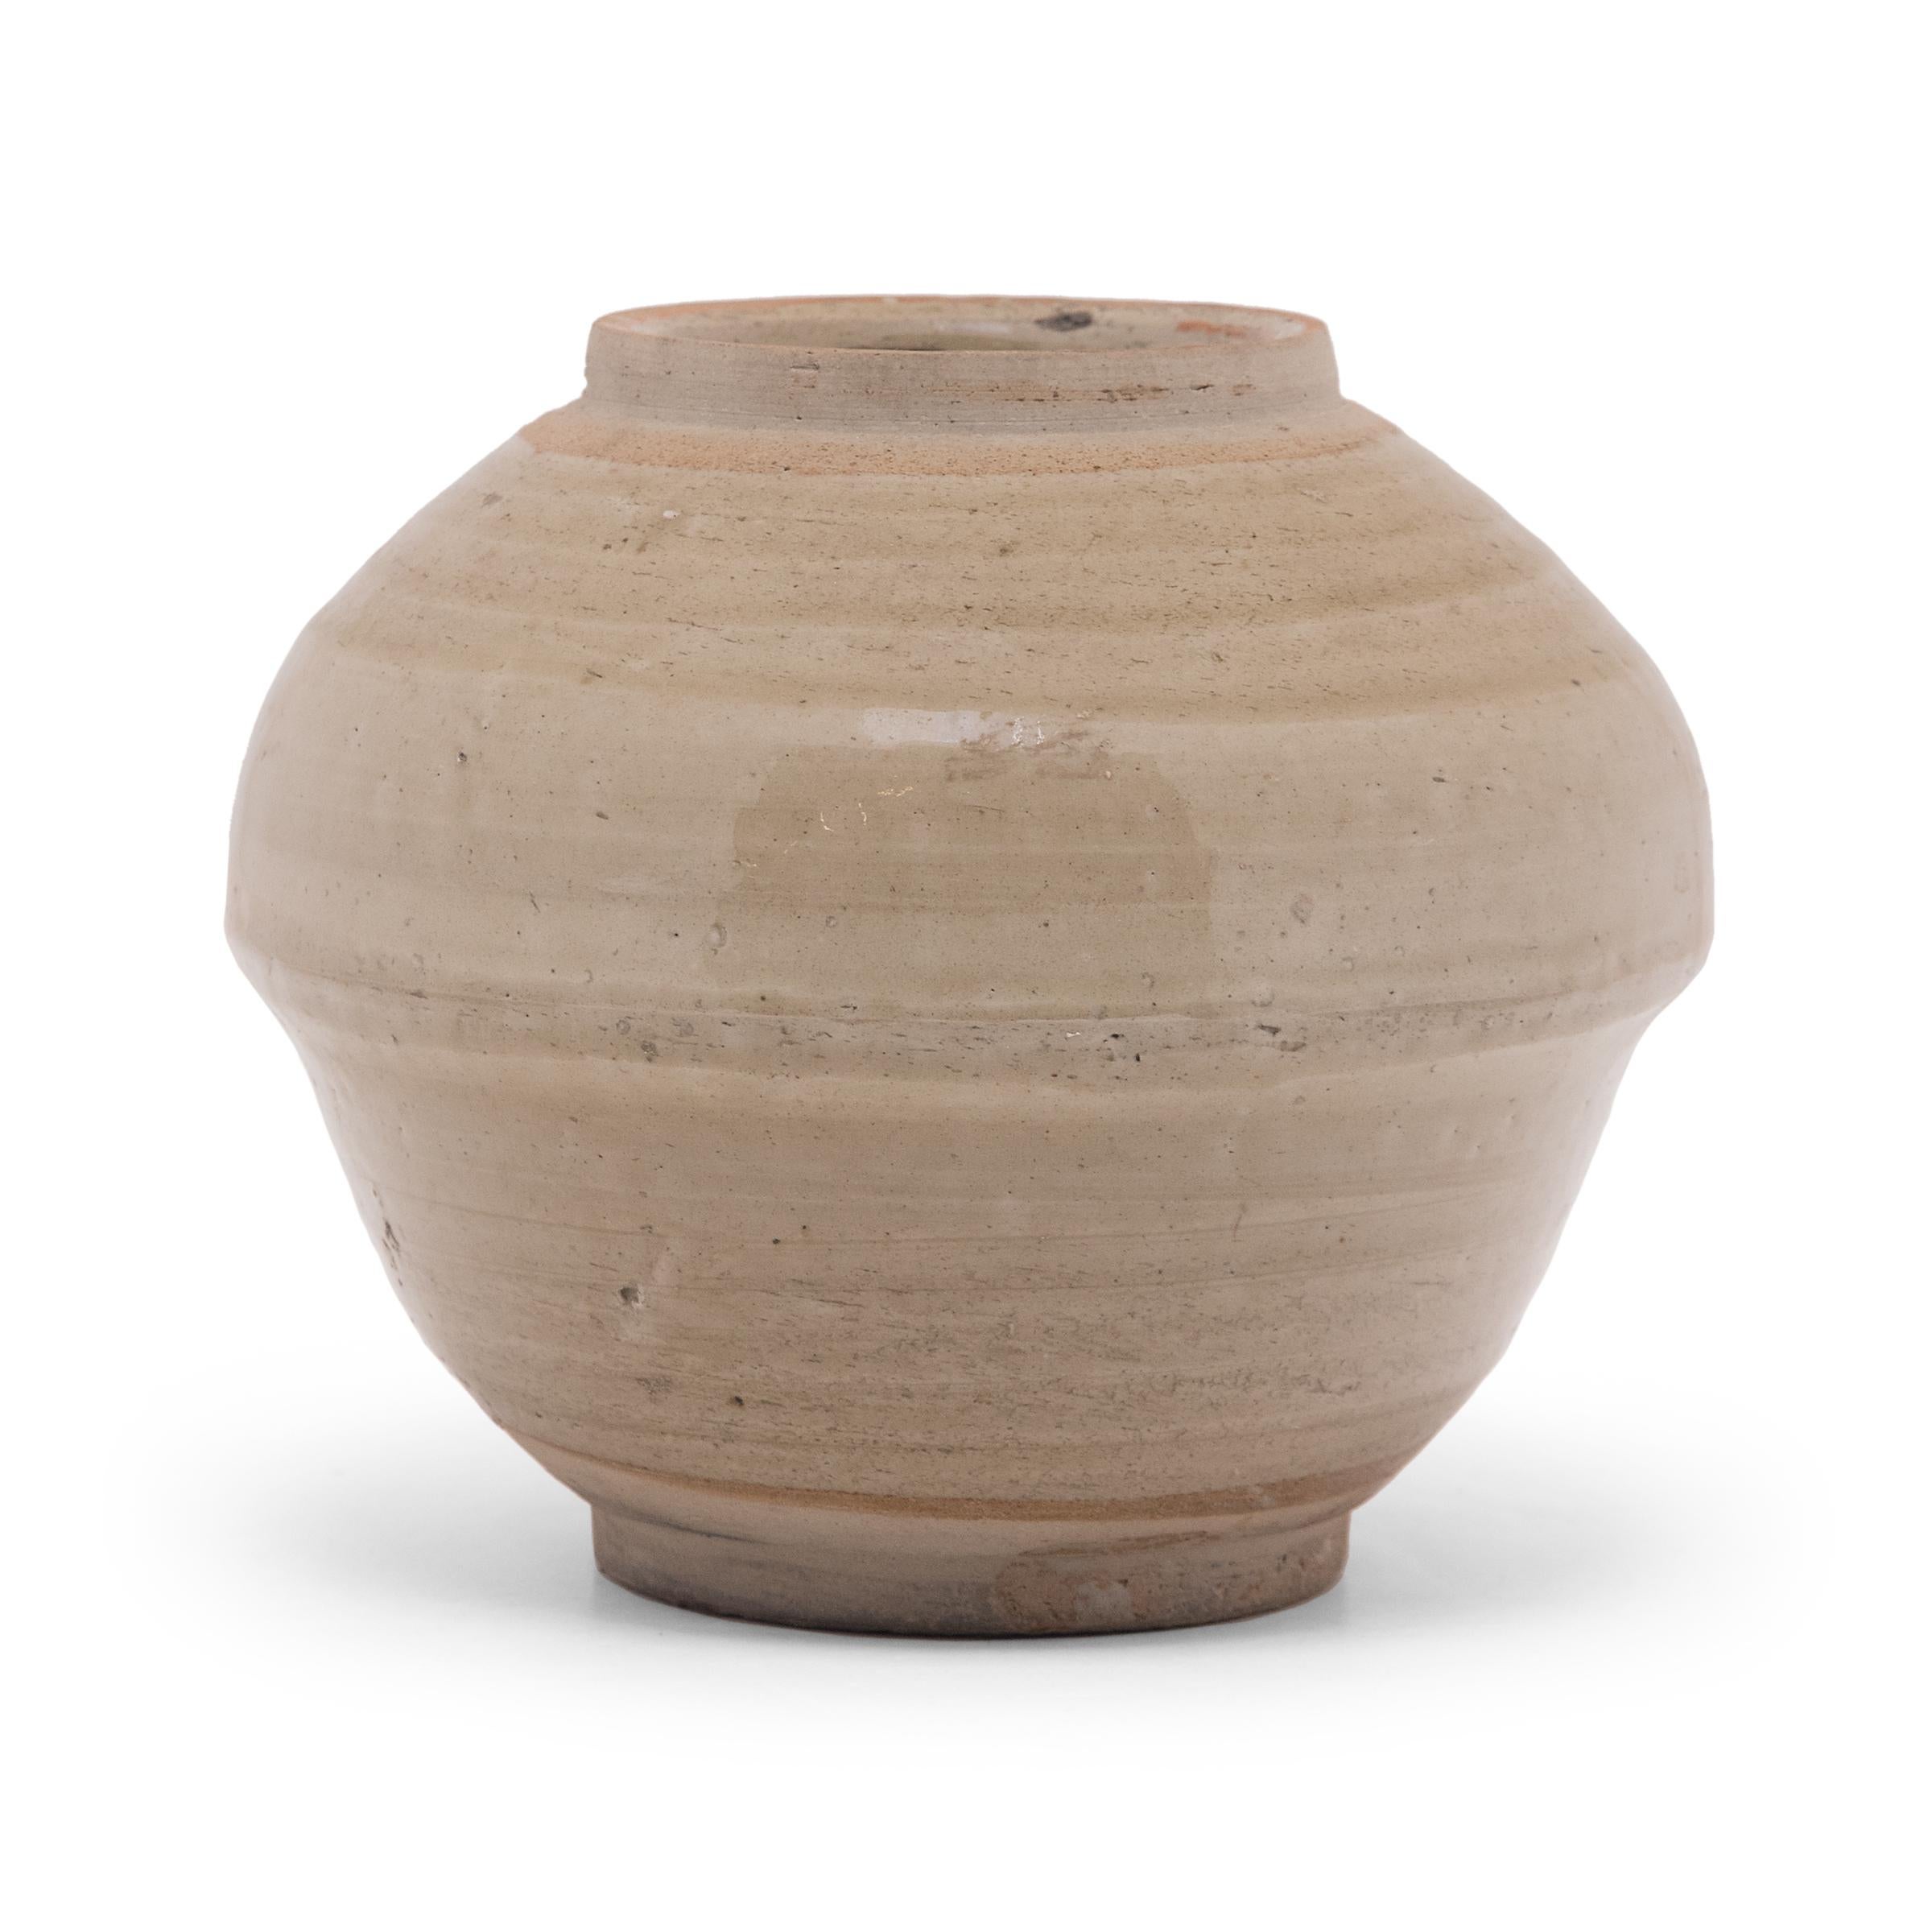 This petite ceramic jar dates to the mid-19th century and was once used for storing food or condiments in a Qing-dynasty kitchen. The jar has high shoulders that extend past the tapered lower half, a form similar to a covered rice bowl. A glossy,